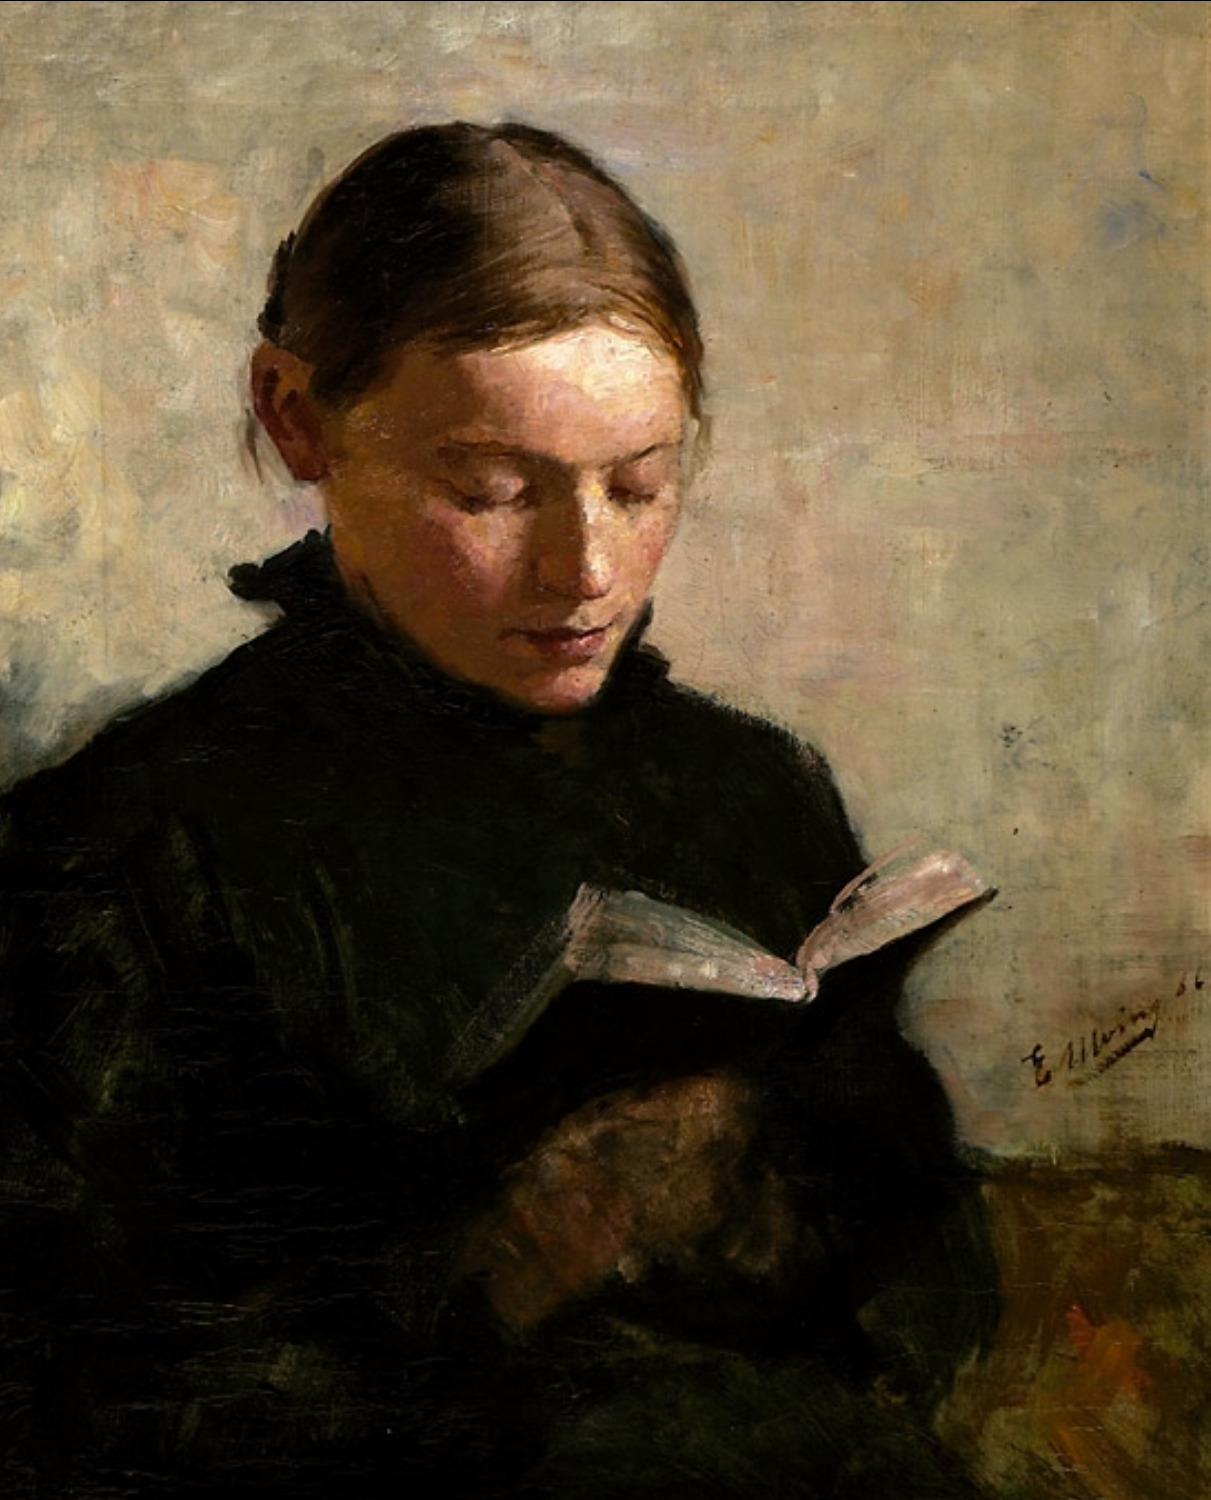 bookaddicted: Source: thomerama
Lesende Kvinne (Reading Woman), 1886. Even Ulving (Norwegian, 1863-1952). Oil on canvas.
Ulving was not a flamboyant artist. He thrived in nature and its spiritual tranquility and beauty. He preferred the coastal areas...